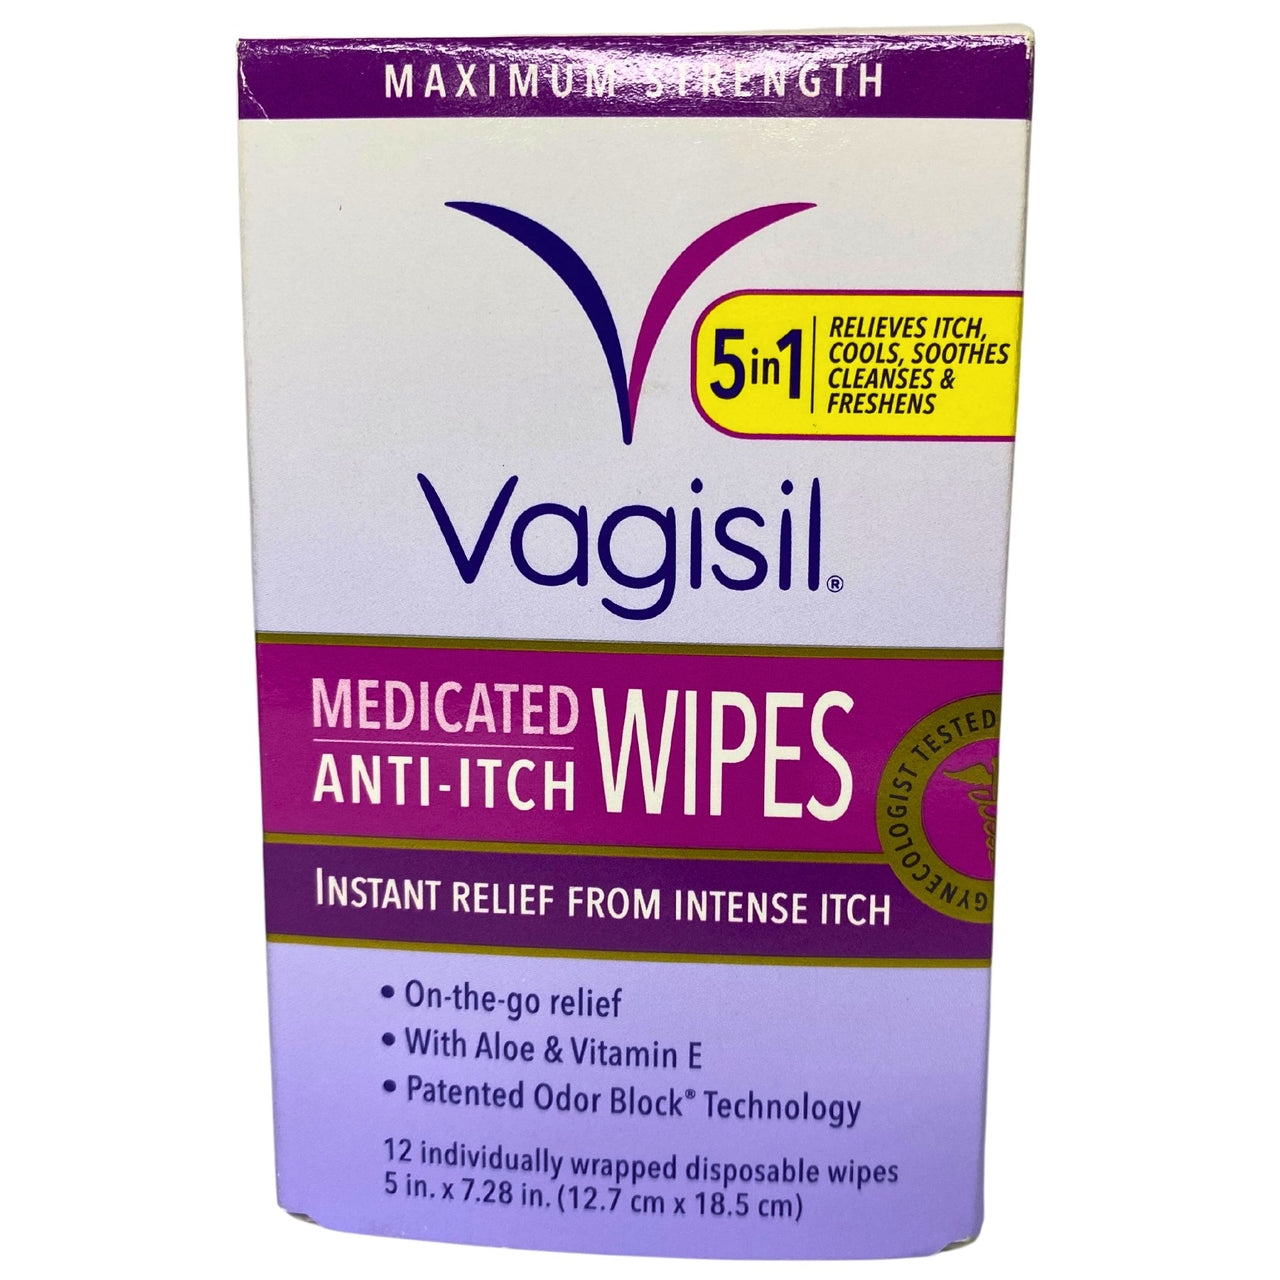 Vagisil 5 in 1 Medicated Anti-Itch Wipes